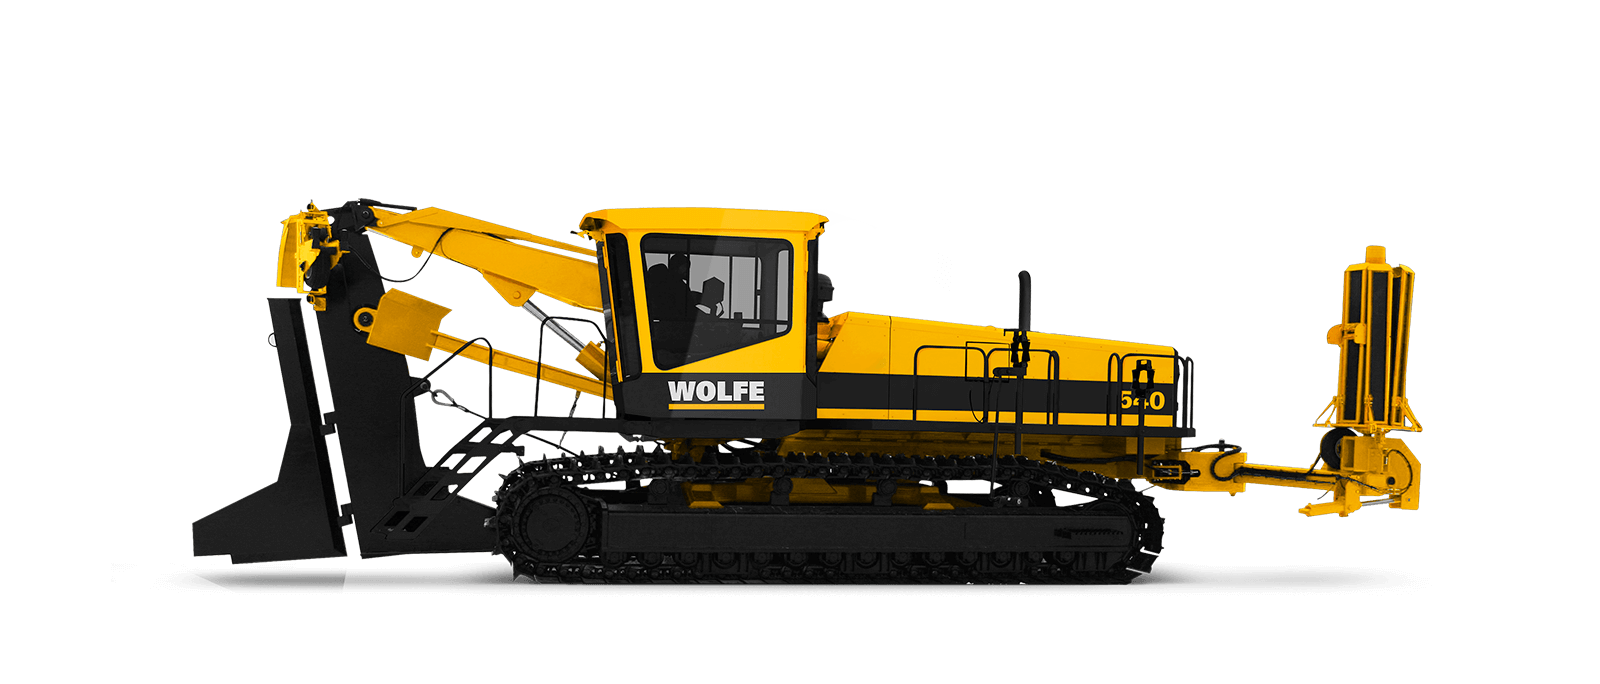 Heavy equipment, Construction Plow, Parallel Link Plows, high-quality equipment, Toughest conditions, Proven performance